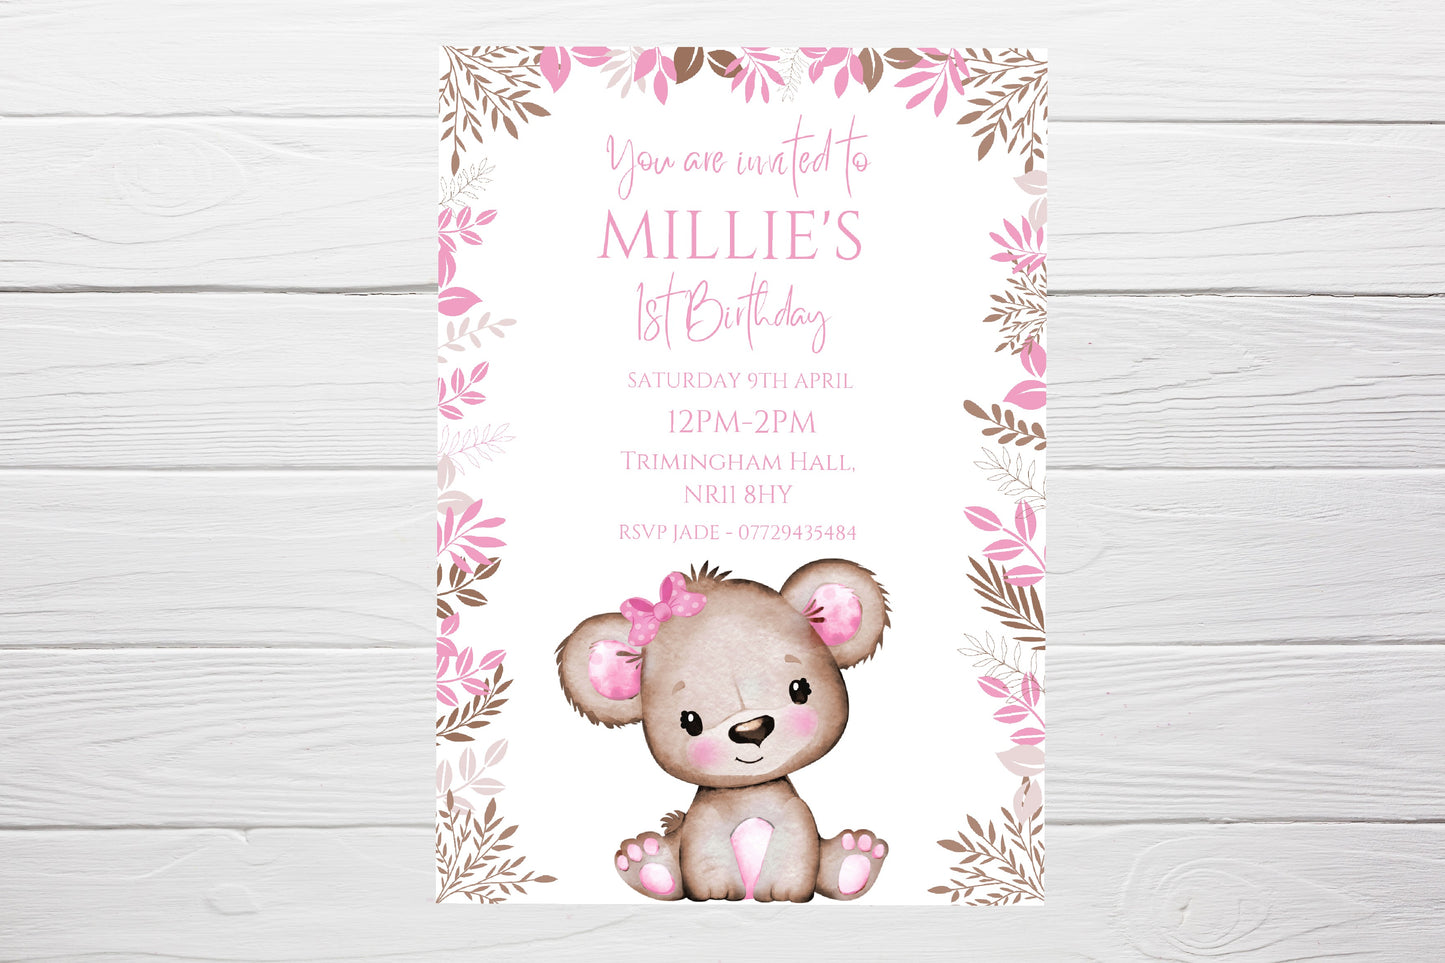 Pink Or White Teddy Bear Baby Shower, Birthday Invitations | A6 Invites | Teddy Bear Theme Invitations | Party Invitations